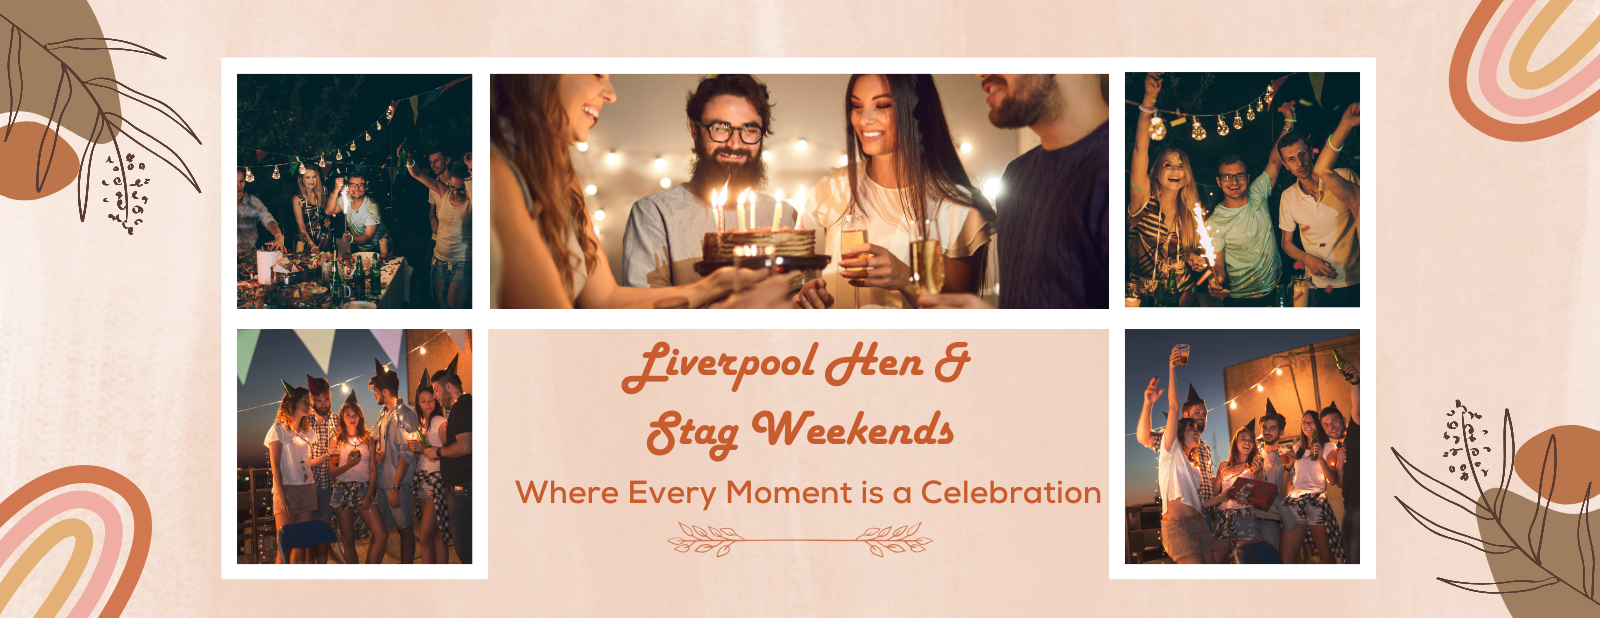 You are currently viewing Liverpool Hen & Stag Weekends: Where Every Moment is a Celebration!